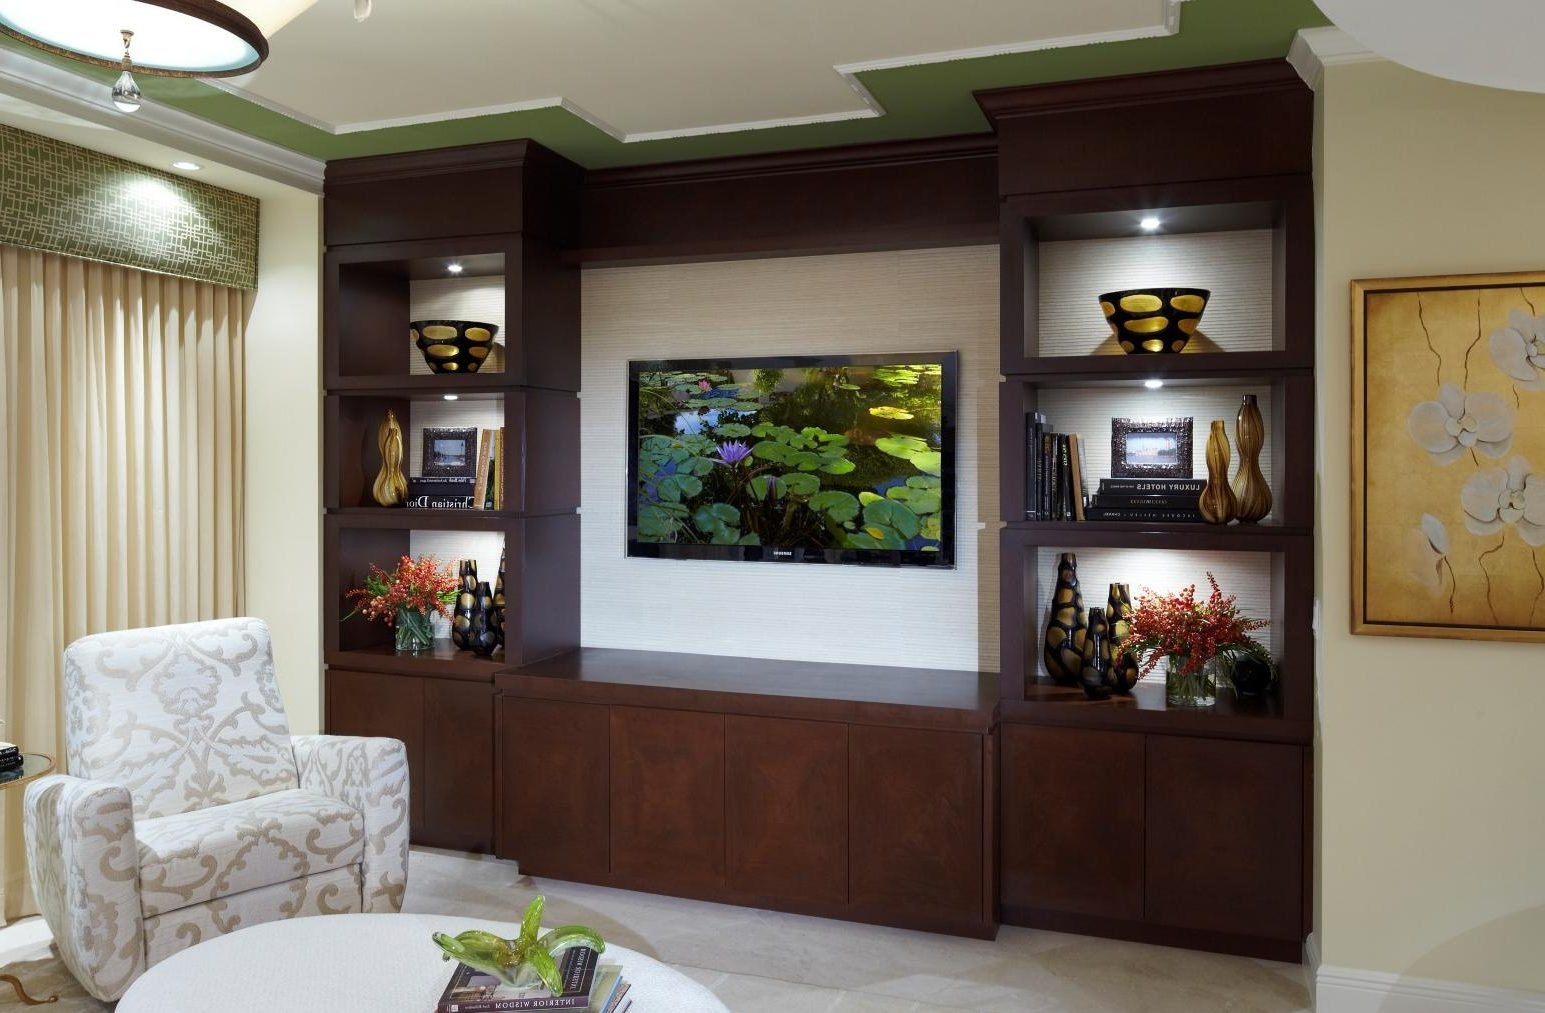 Wall Unit Living Room
 15 Ideas of Fitted Wall Units Living Room